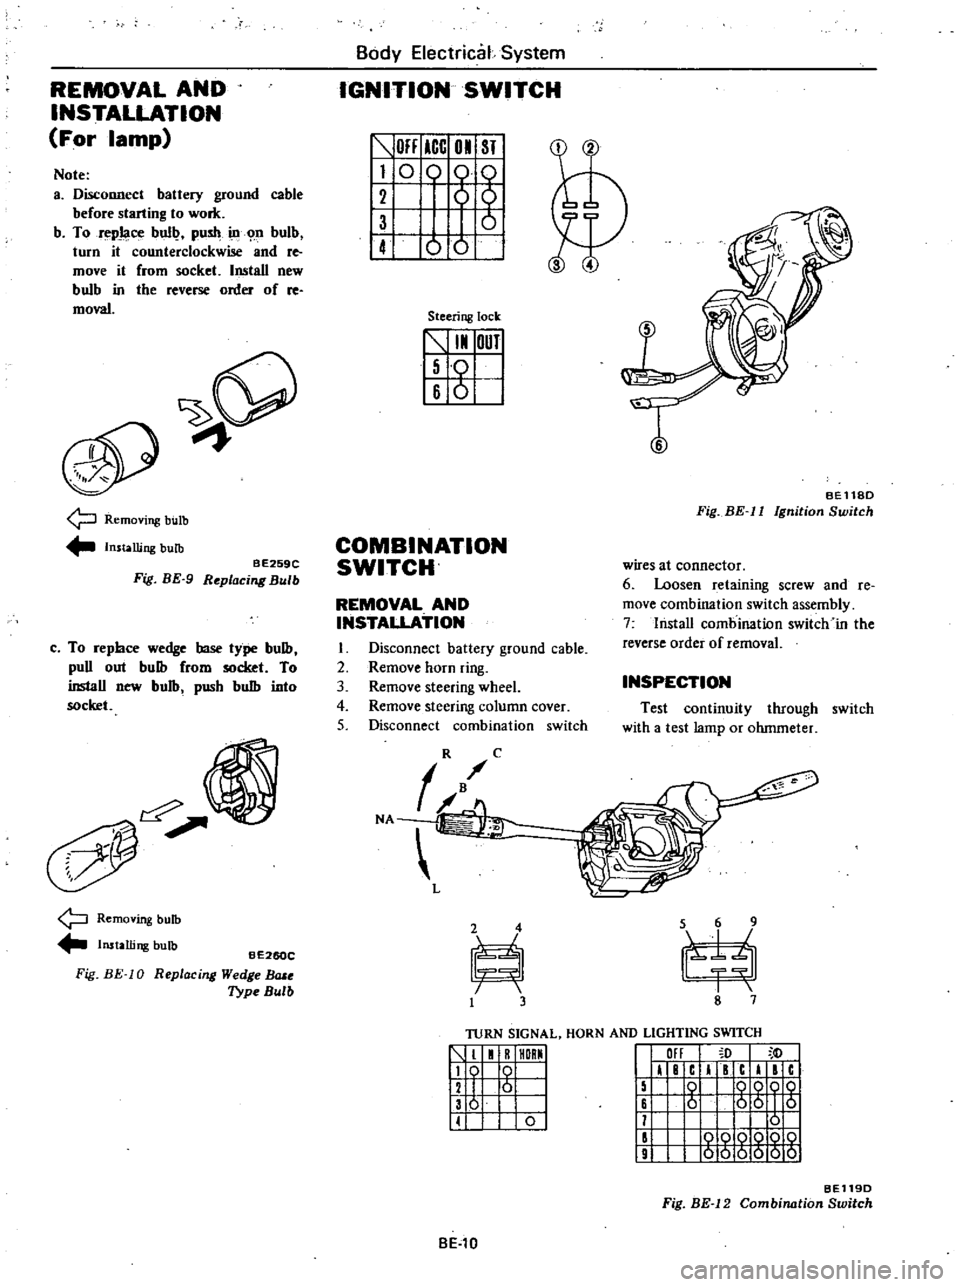 DATSUN 210 1979  Service Manual 
REMOVAL 
AND

INSTALLATION

For

lamp

Note

a 
Disconnect

battery 
ground 
cable

before

starting 
to

work

b 
To

repJaoe 
bull

push 
ill 
n 
bulb

turn 
it

counterclockwise 
and 
re

move 
it